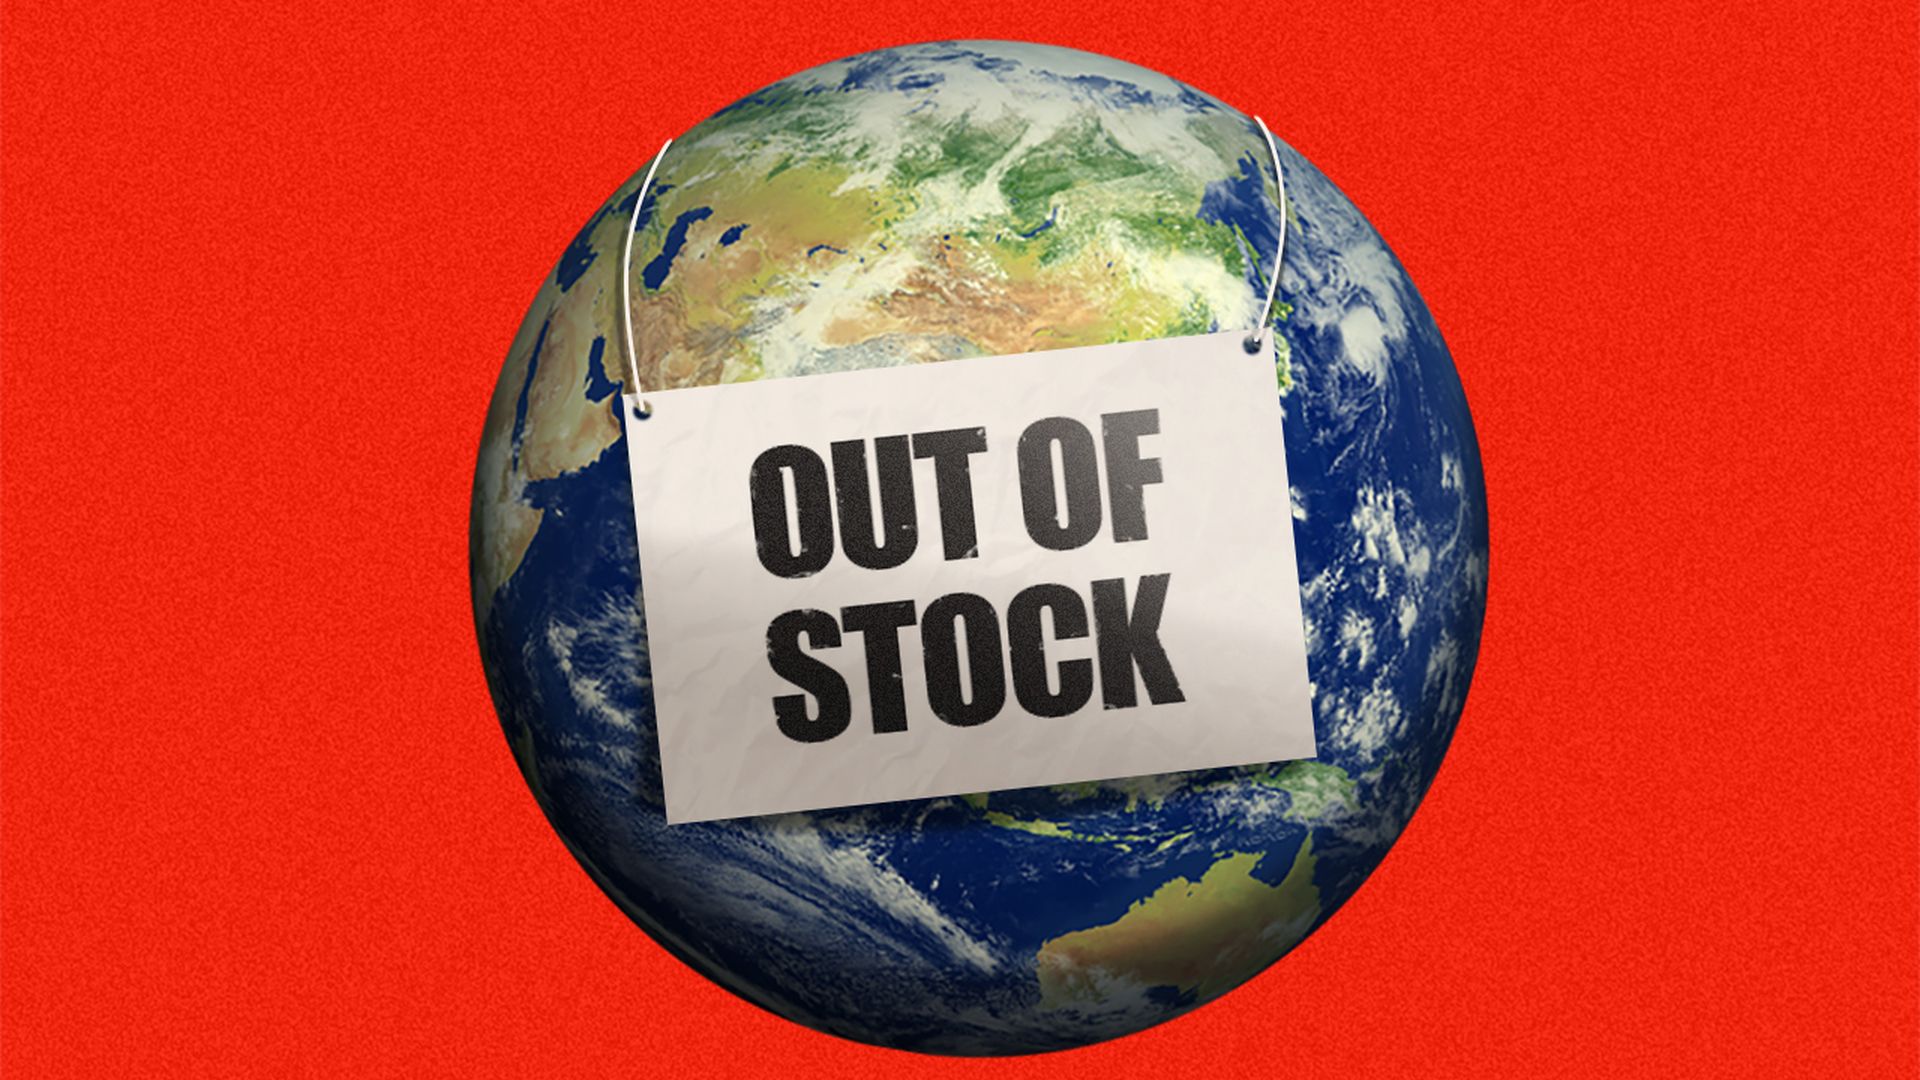 Illustration of the Earth featuring an "Out of Stock" sign